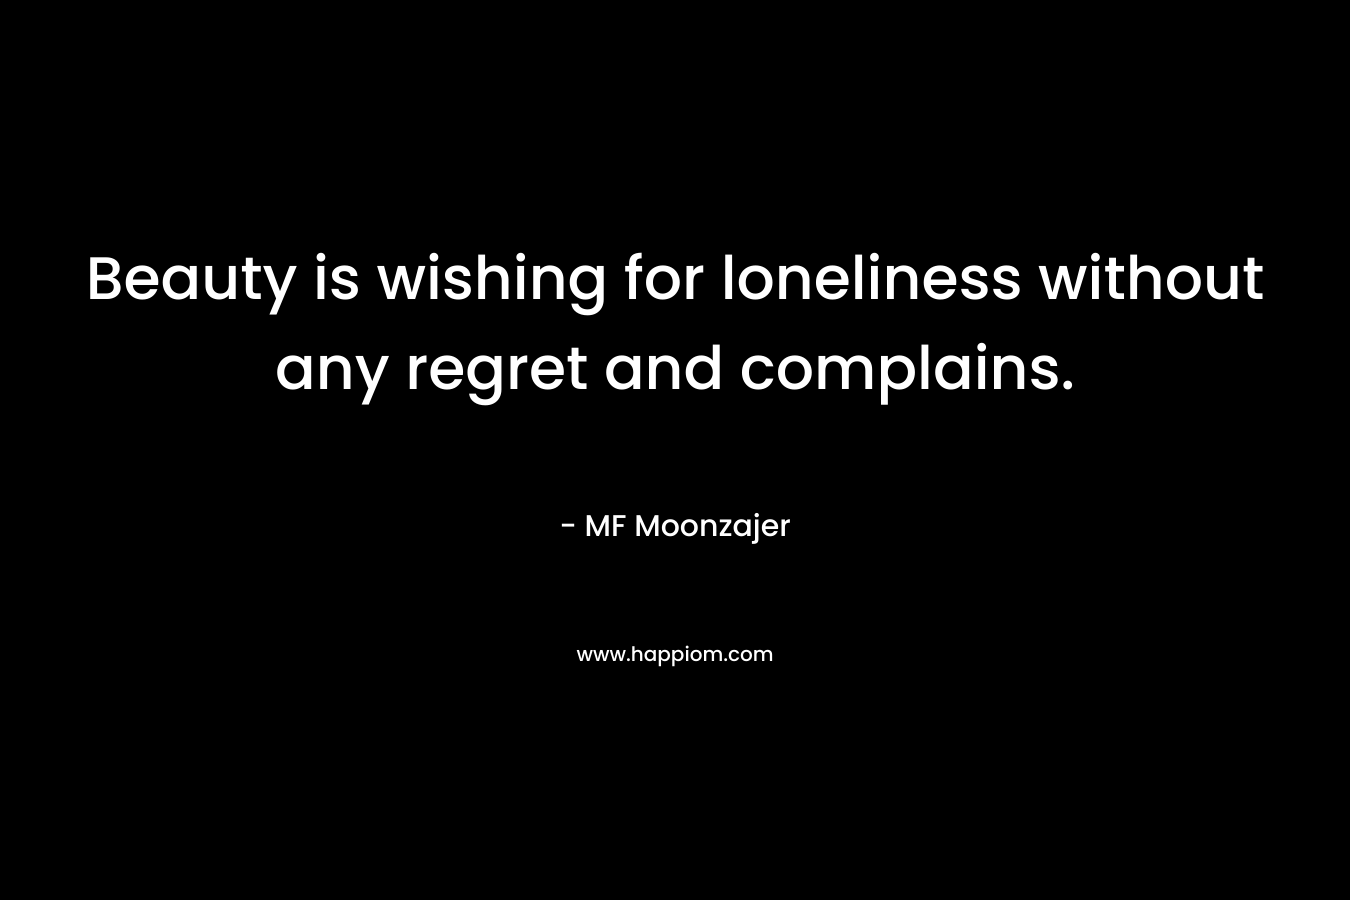 Beauty is wishing for loneliness without any regret and complains.